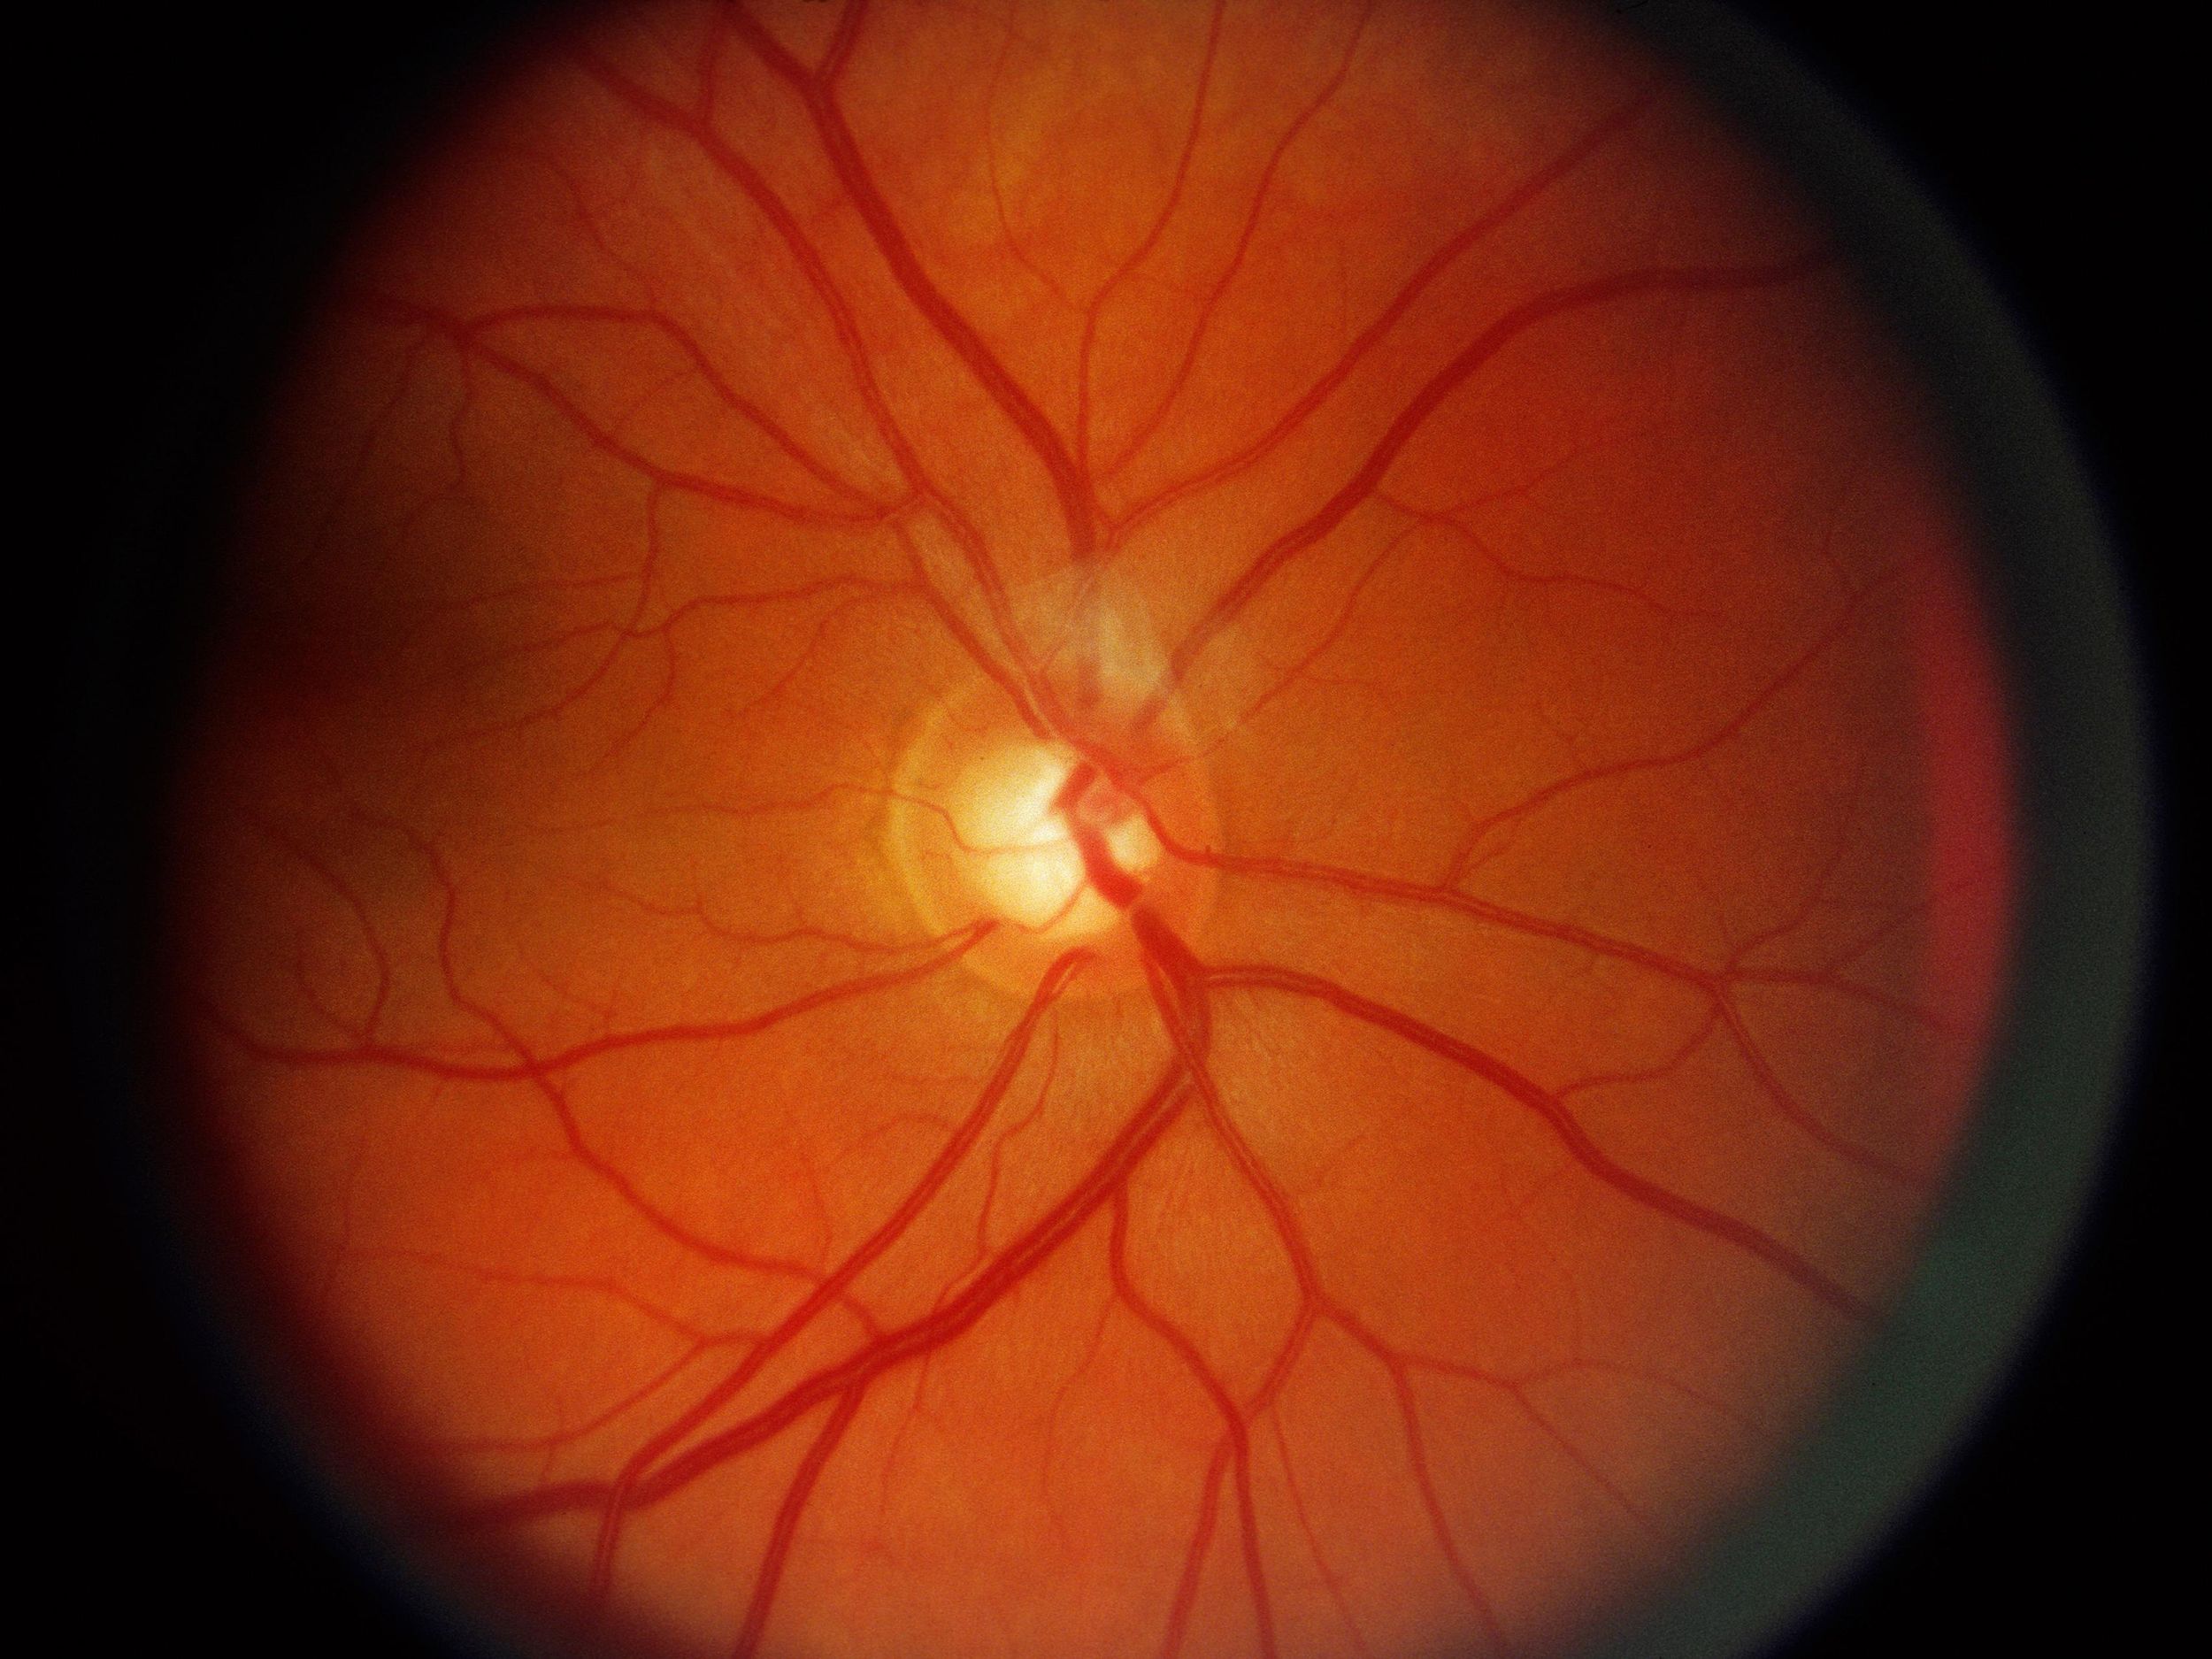 close up photo of retina in eye with glaucoma